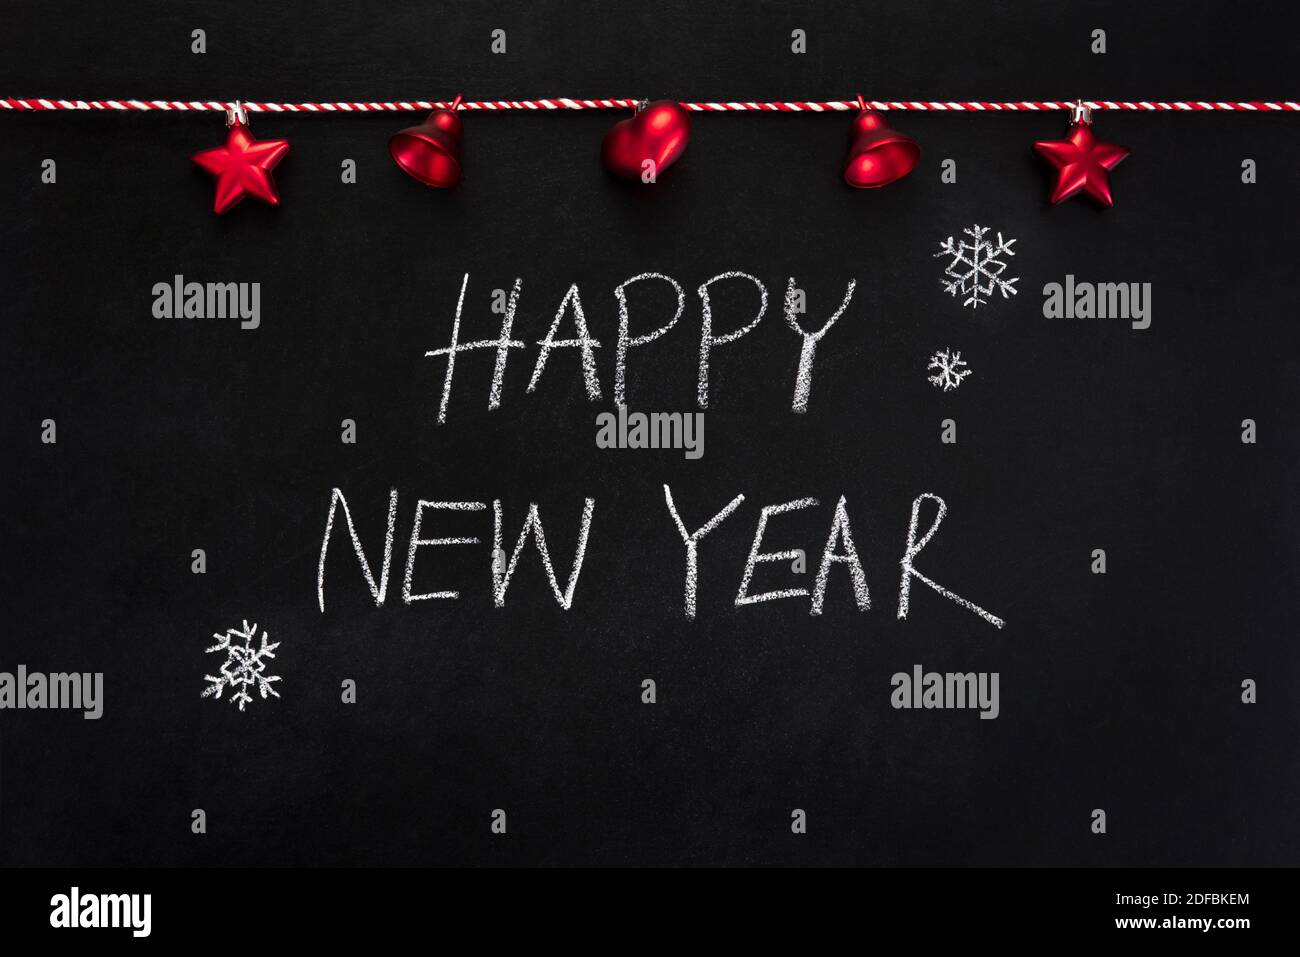 HAPPY NEW YEAR text with decorated items on blackboard Stock Photo